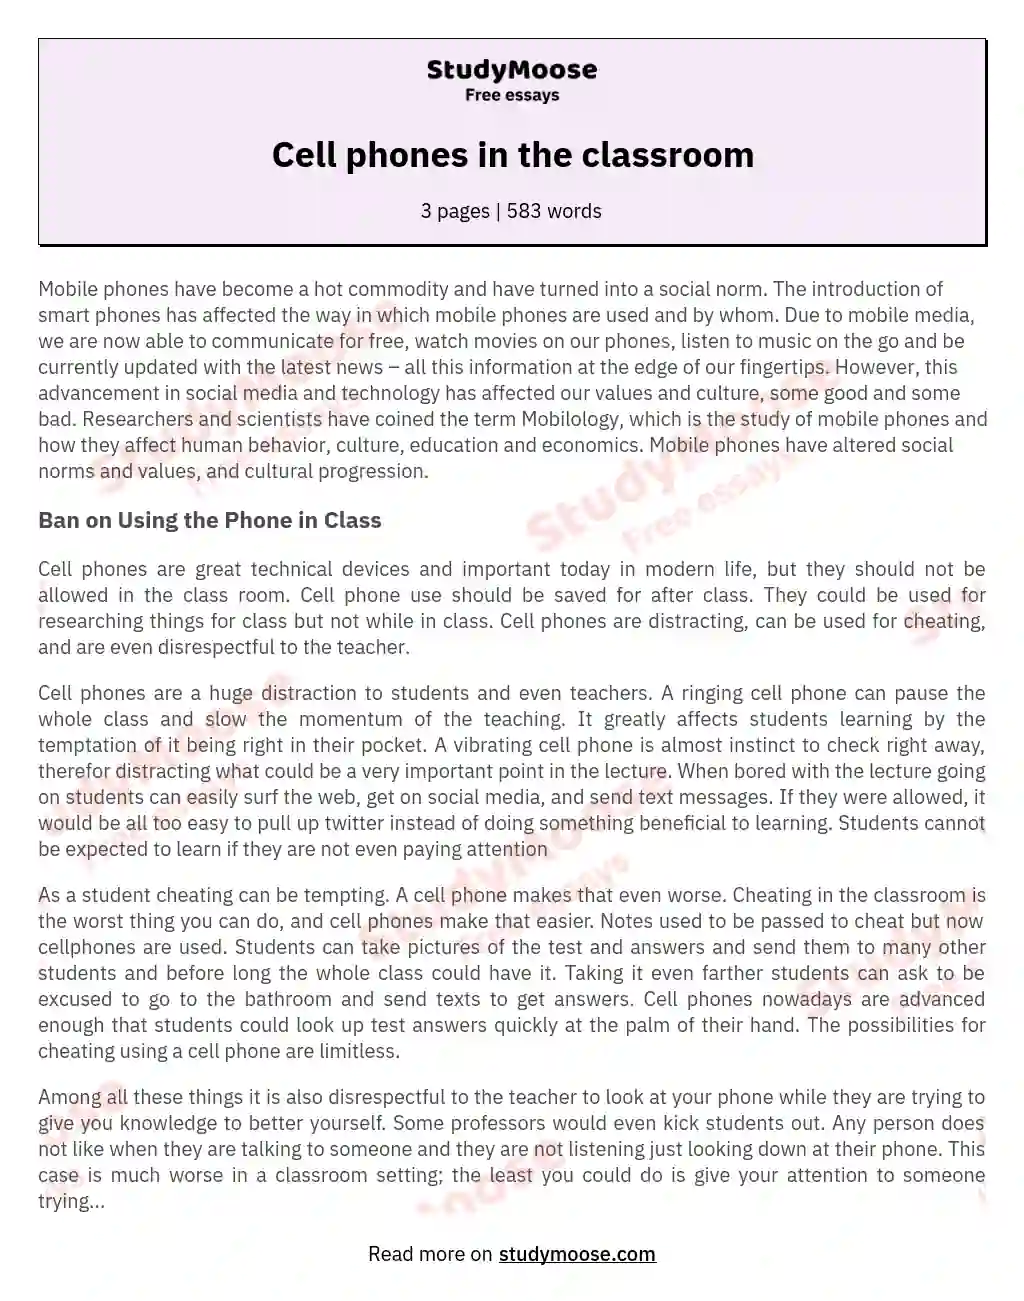 Cell phones in the classroom essay